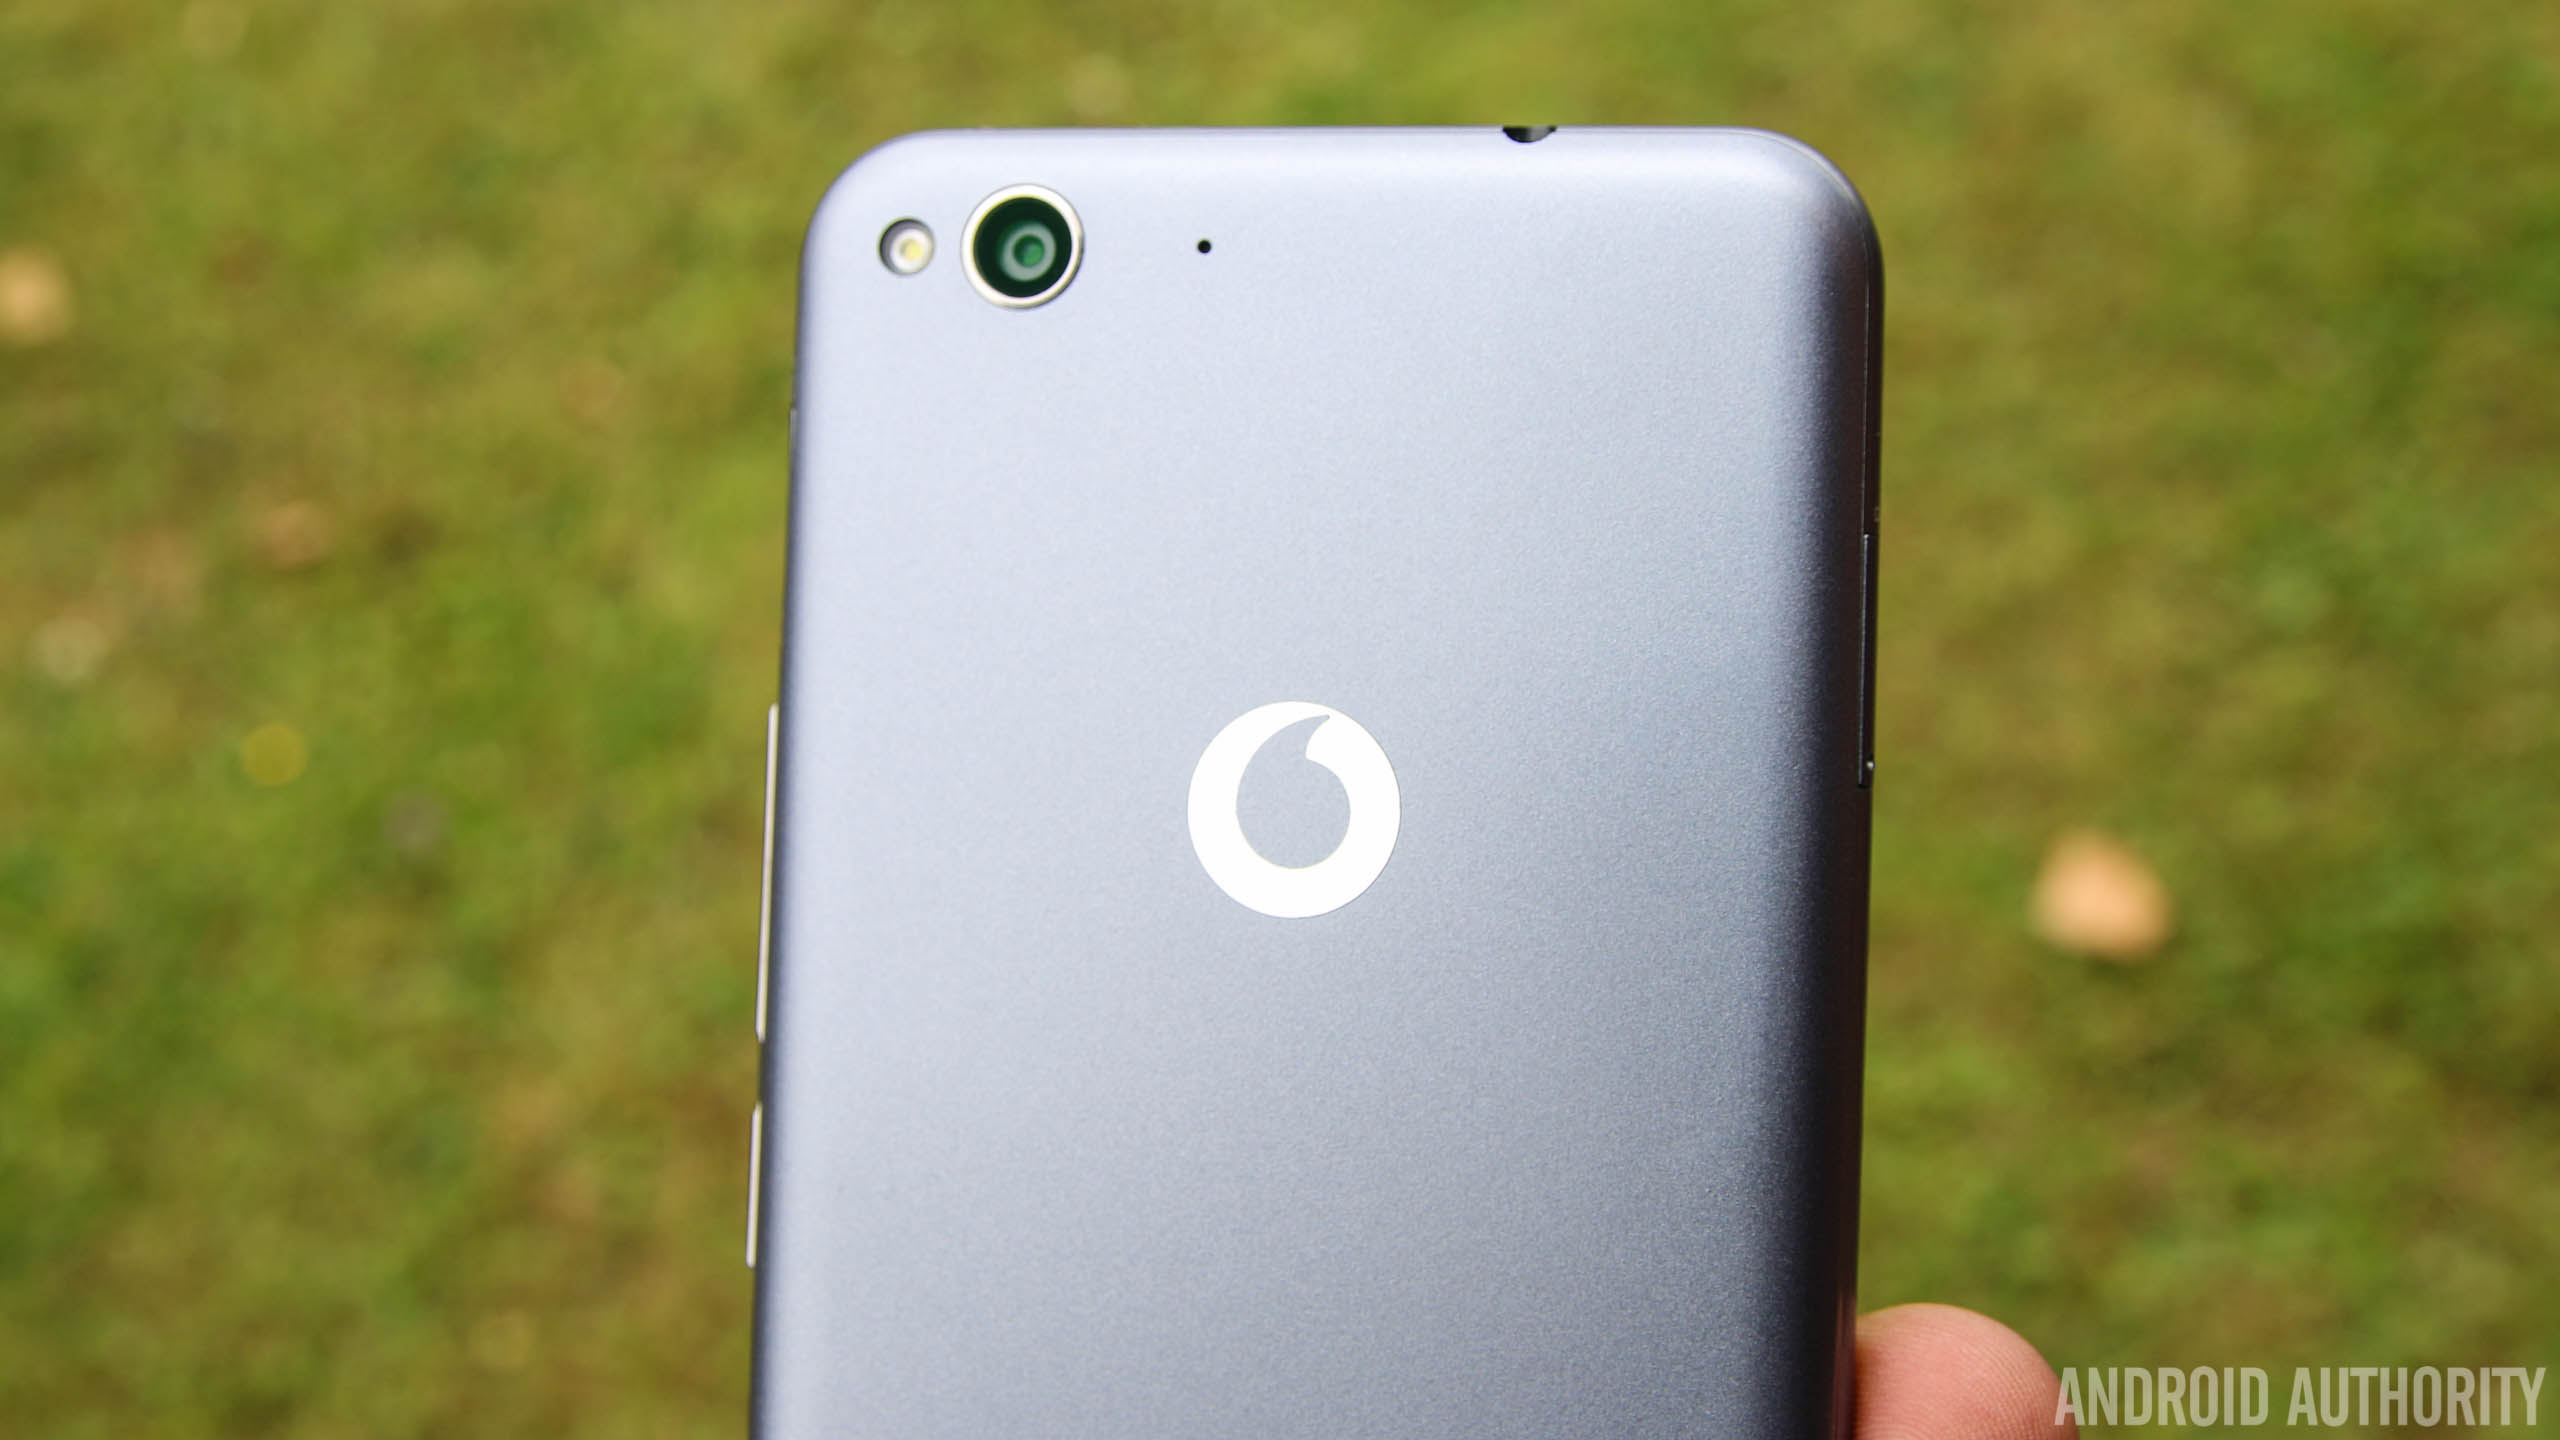 Vodafone logo on a phone - Vodafone UK network review